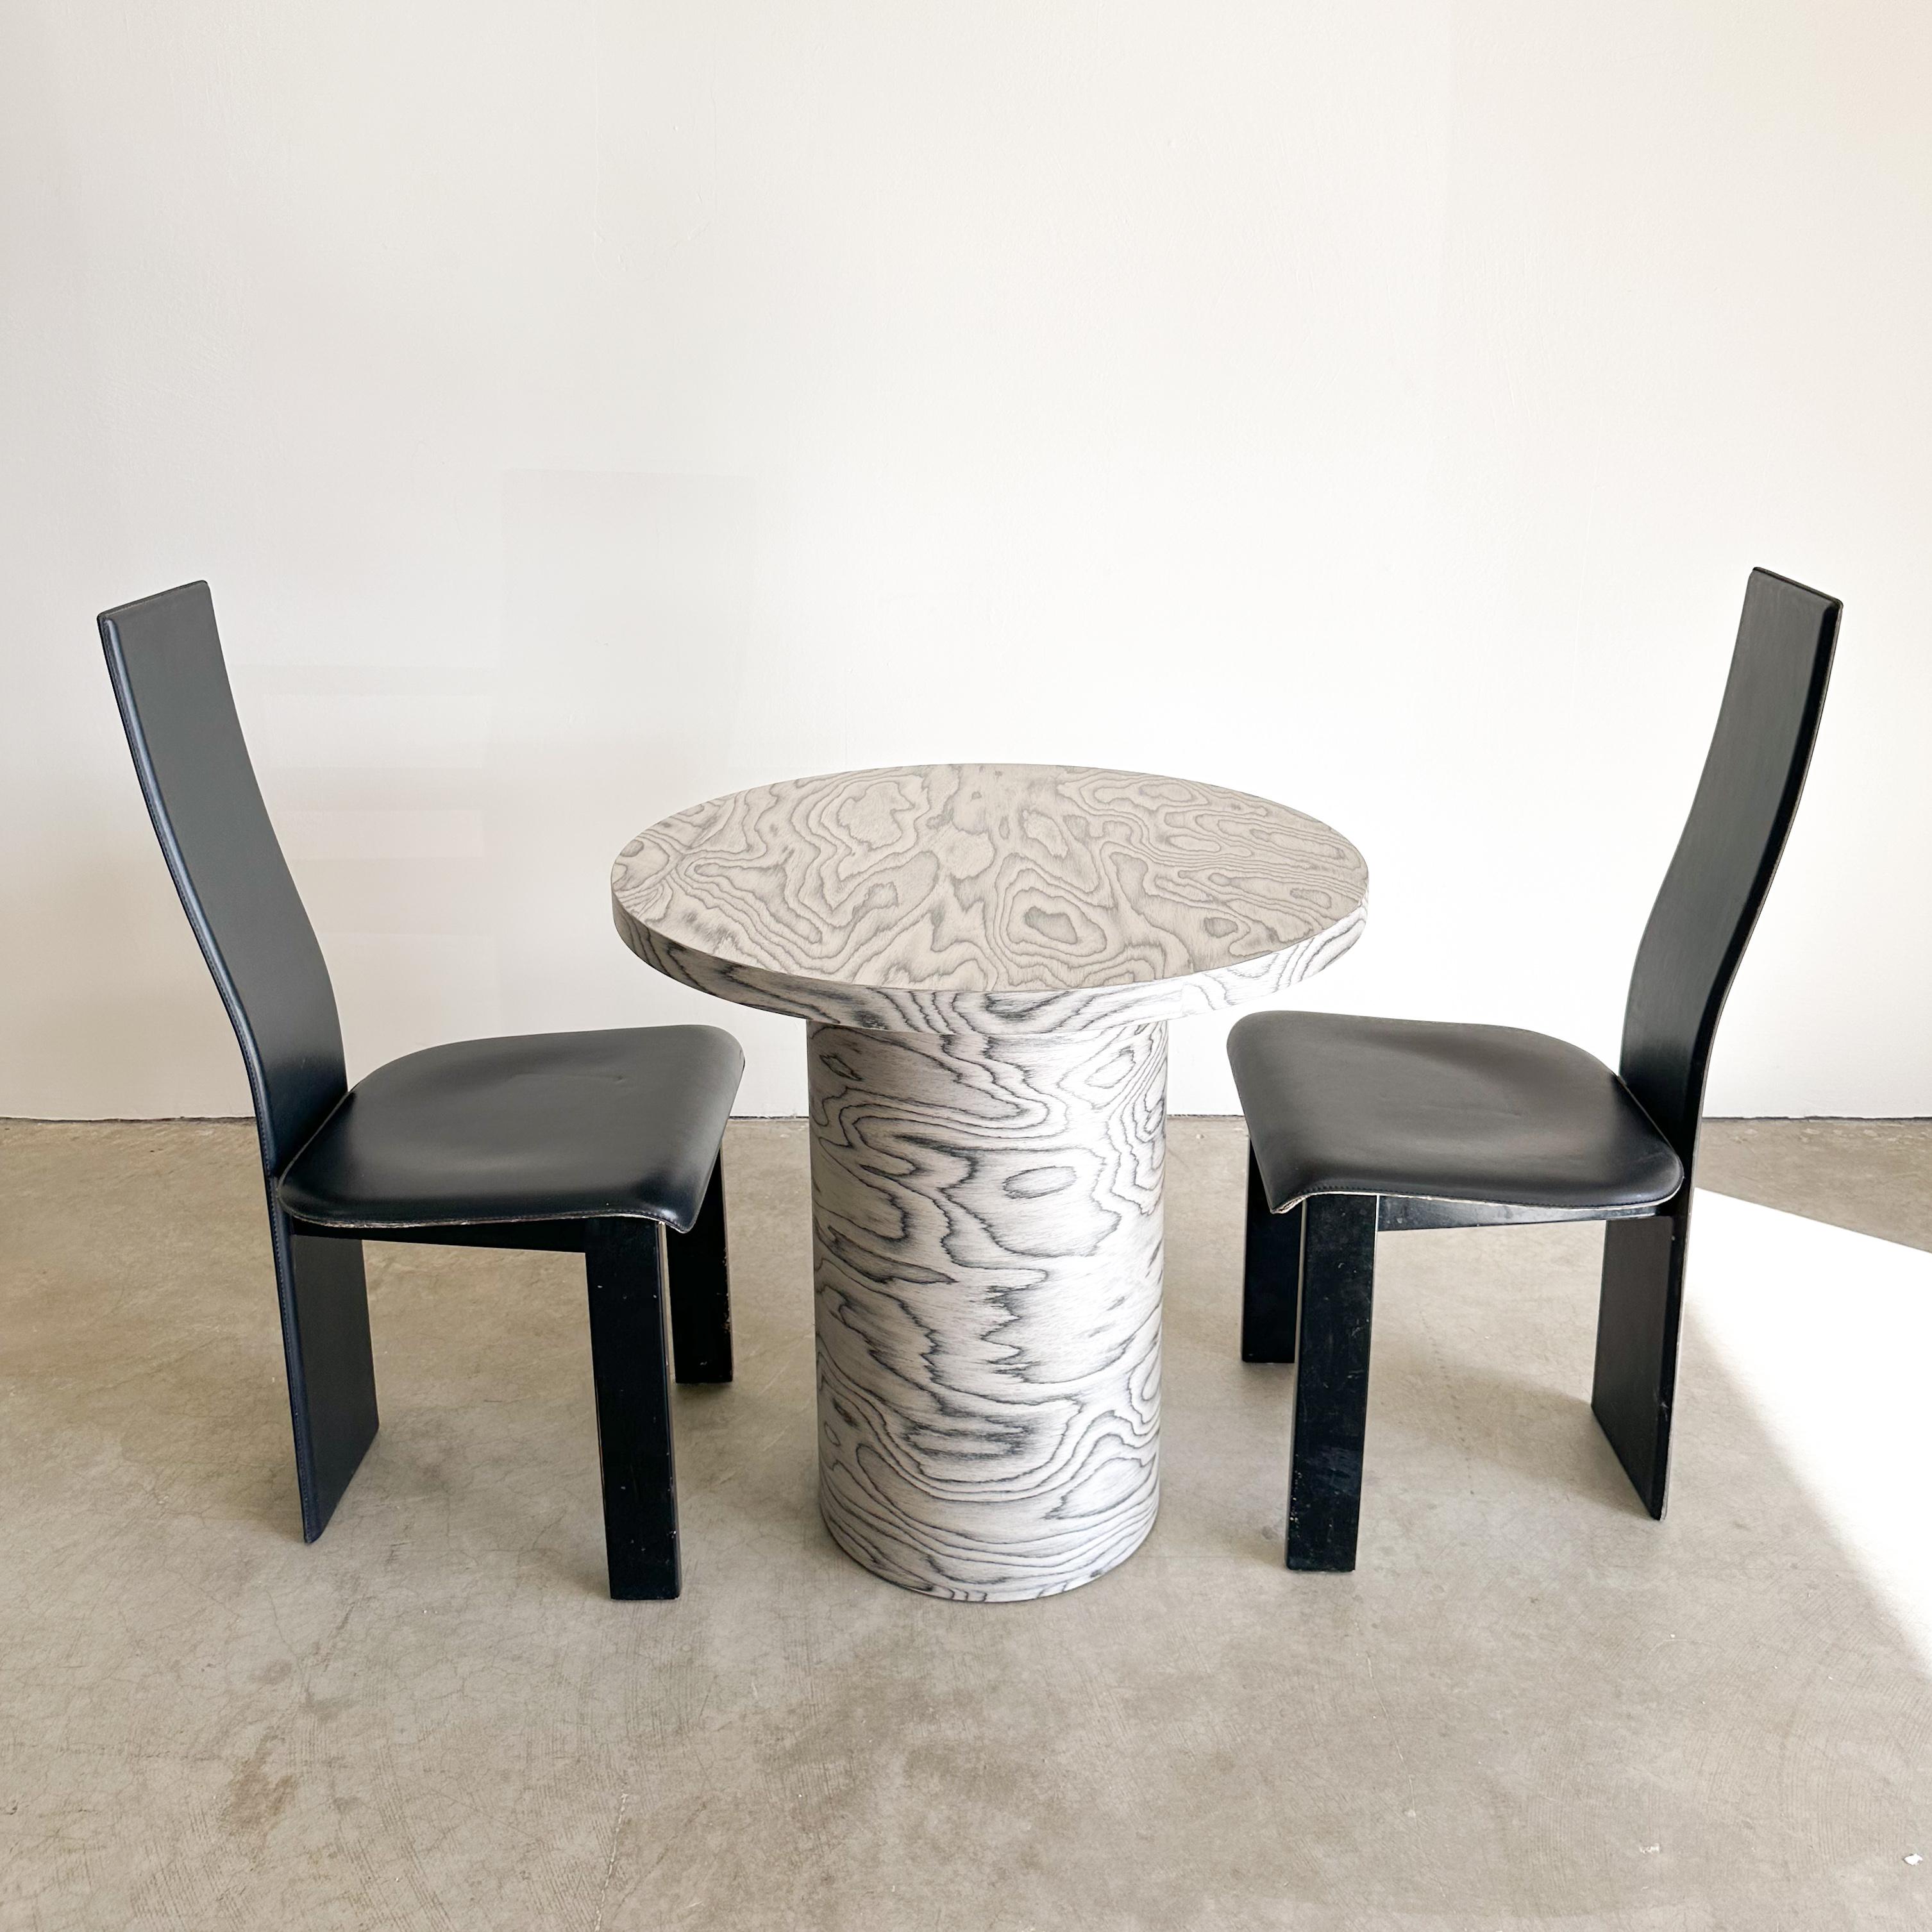 Vintage Round Dining/Kitchenette Table featuring Ettore Sottsass Veneer.

This vintage table features re-veneering with the original ALPI veneer, designed by Ettore Sottsass in 1985 an iconic figure in the Memphis design movement. Its distinctive